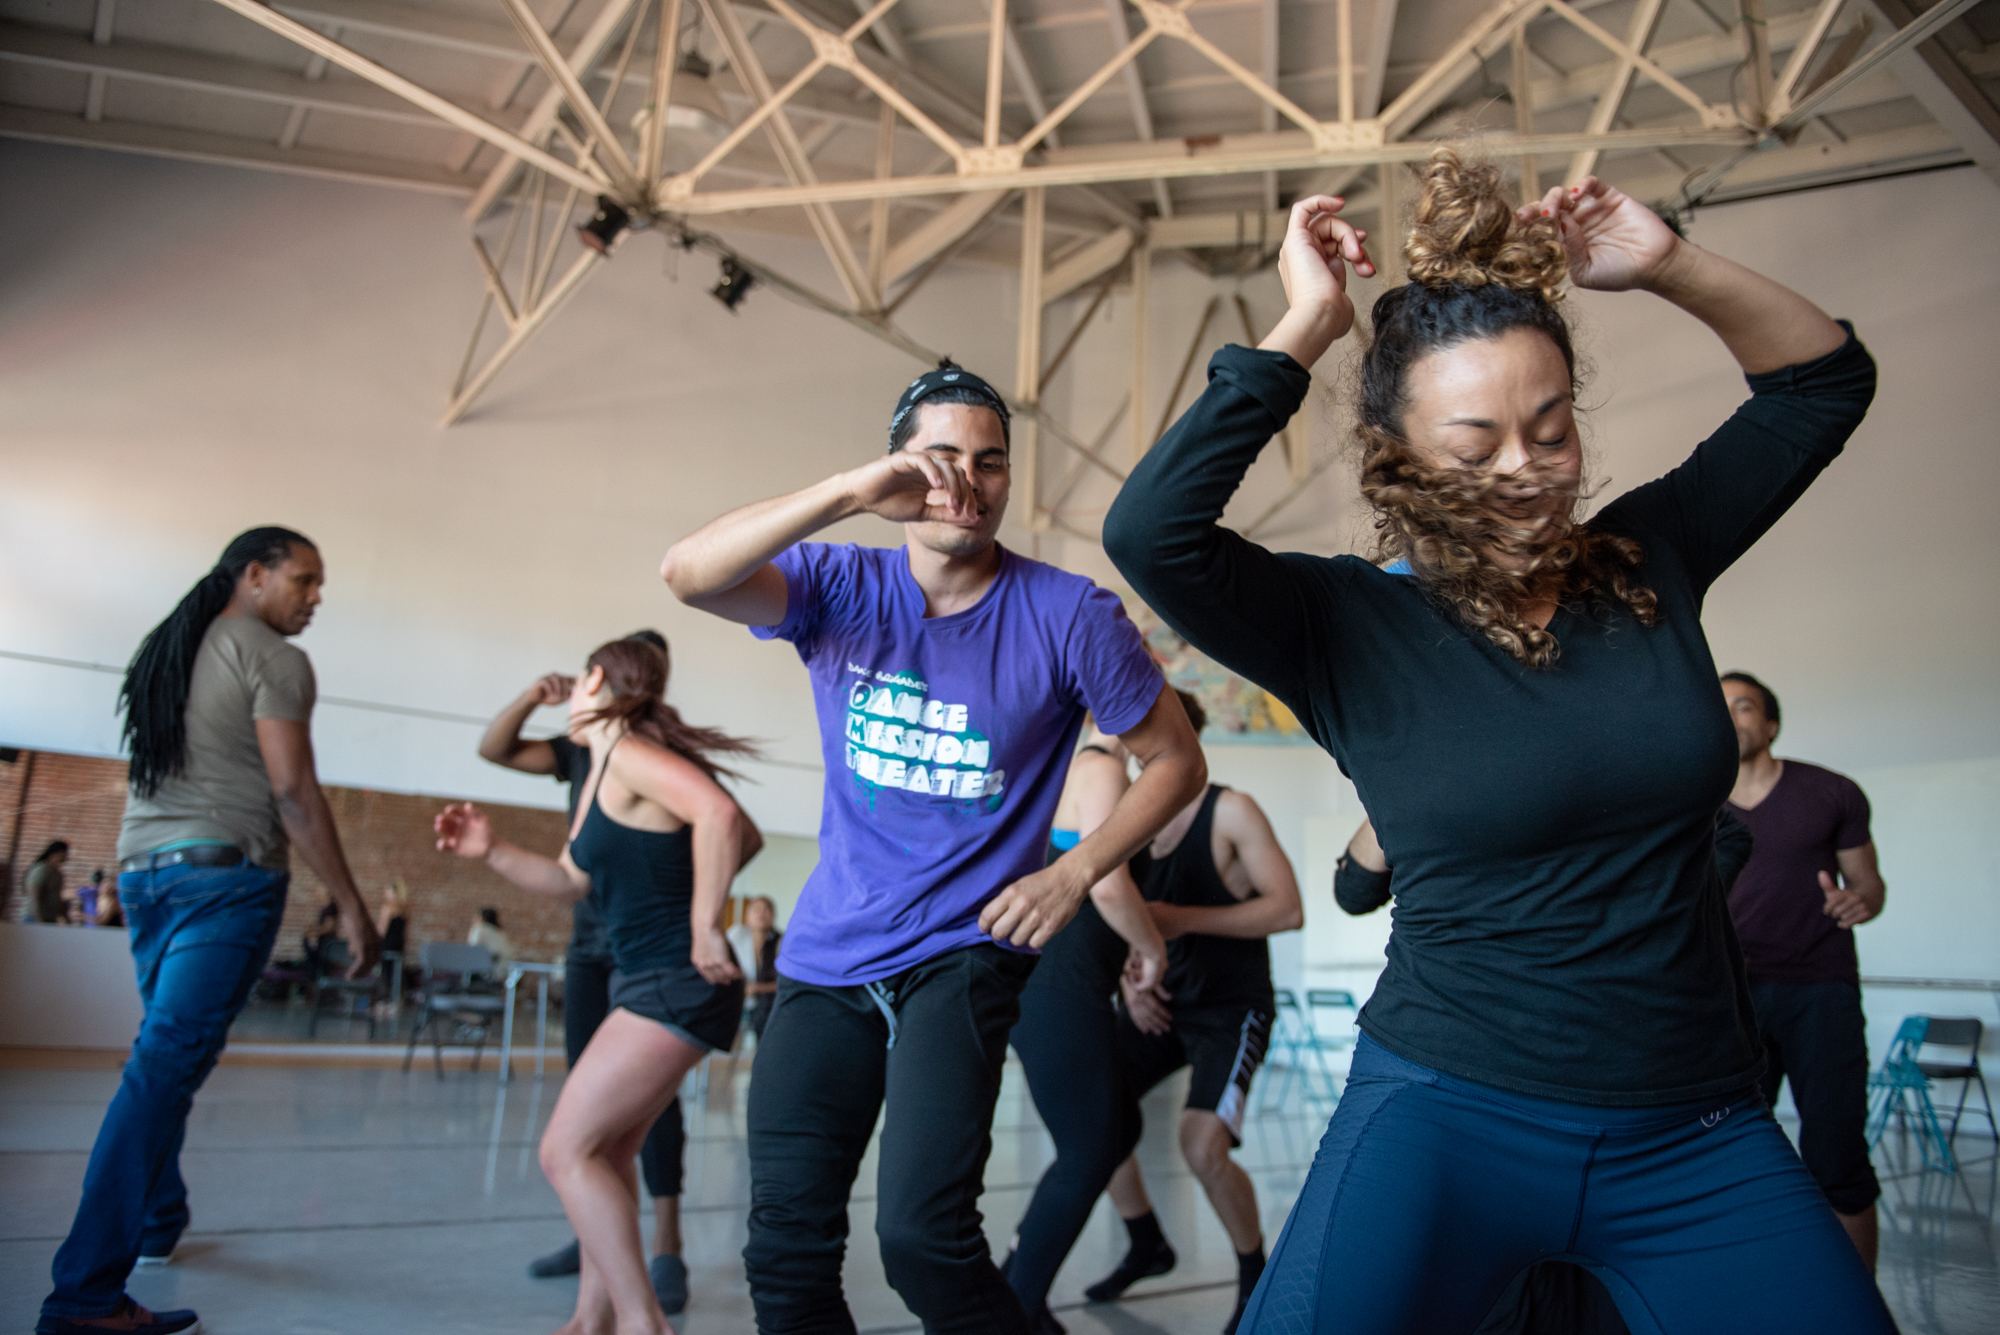  Dancers Adonis Martin Quiñones (center wearing purple shirt) and Jillian Miller (right) dance a rumba with other members of the Alayo Dance Company, as artistic director Ramon Ramos Alayo looks on, during a rehearsal for the upcoming Cuba Caribe Fe